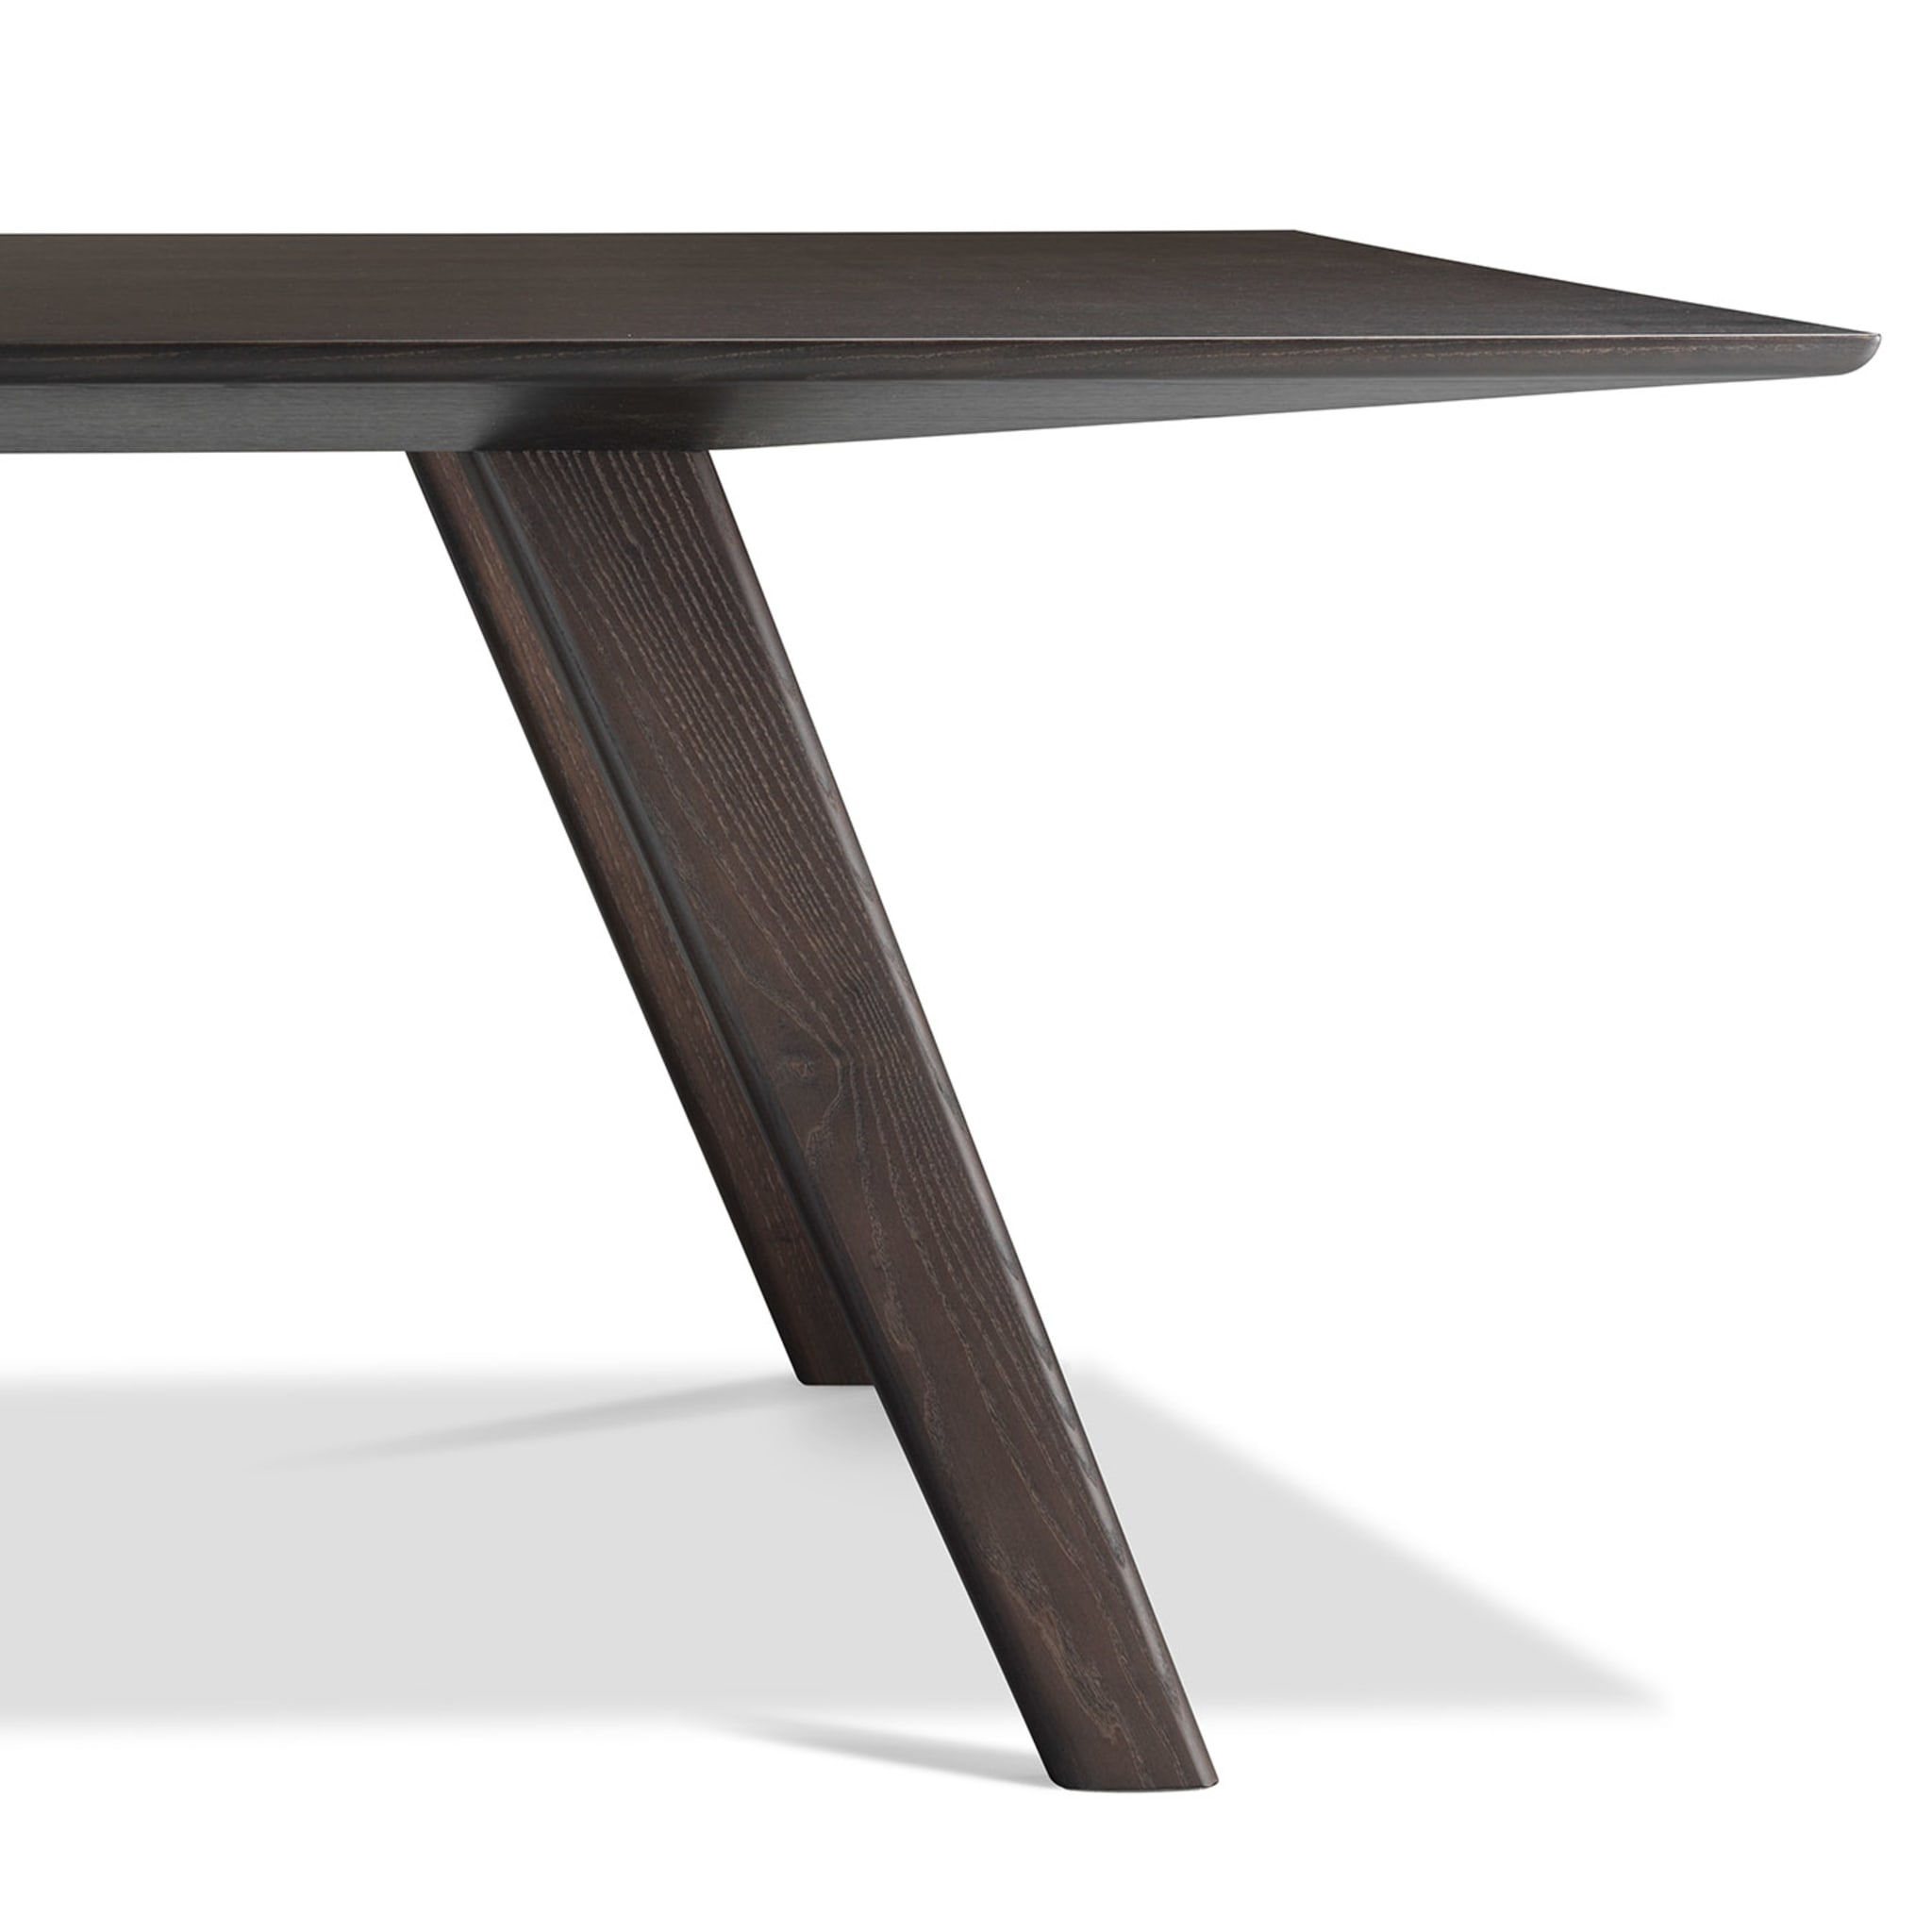 Locust Brown Dining Table by Stefano Giovannoni - Alternative view 5